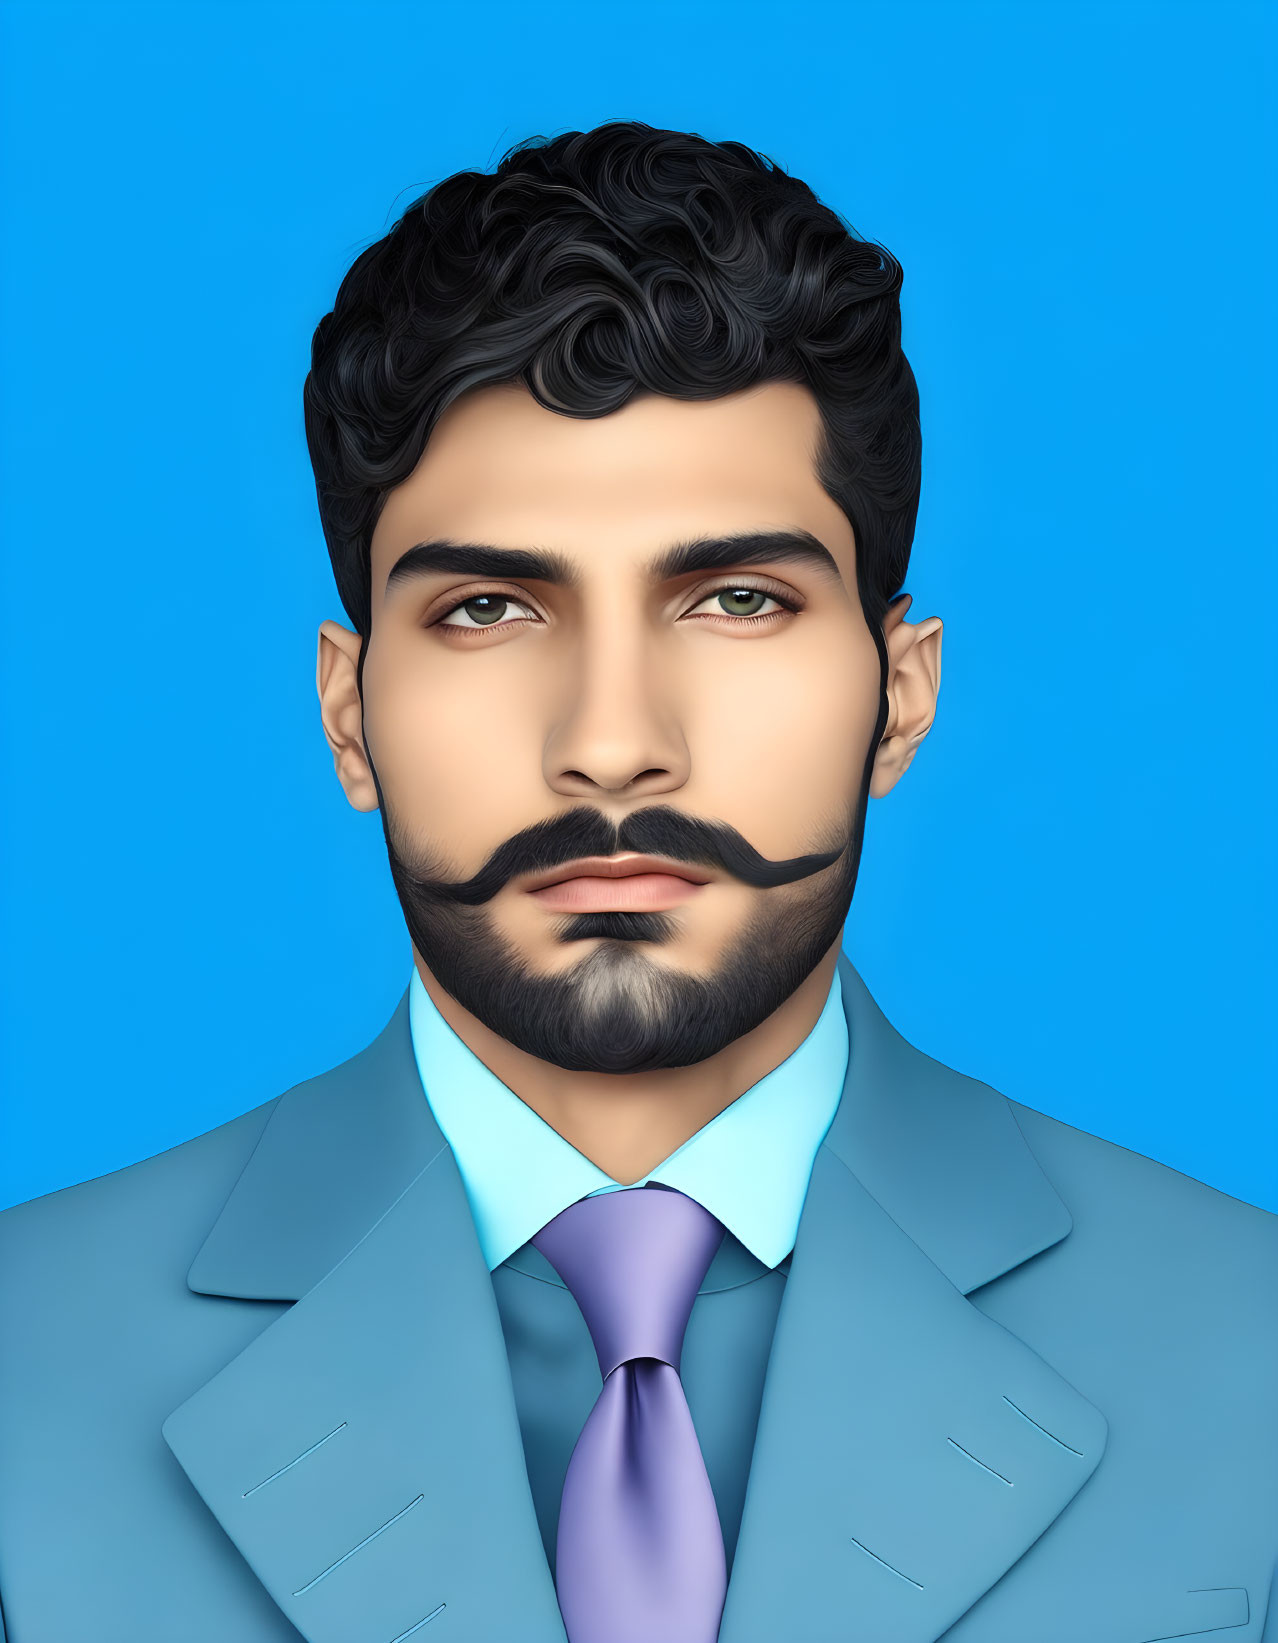 Digital illustration of man with dark hair, thick mustache, blue suit, purple tie on blue background